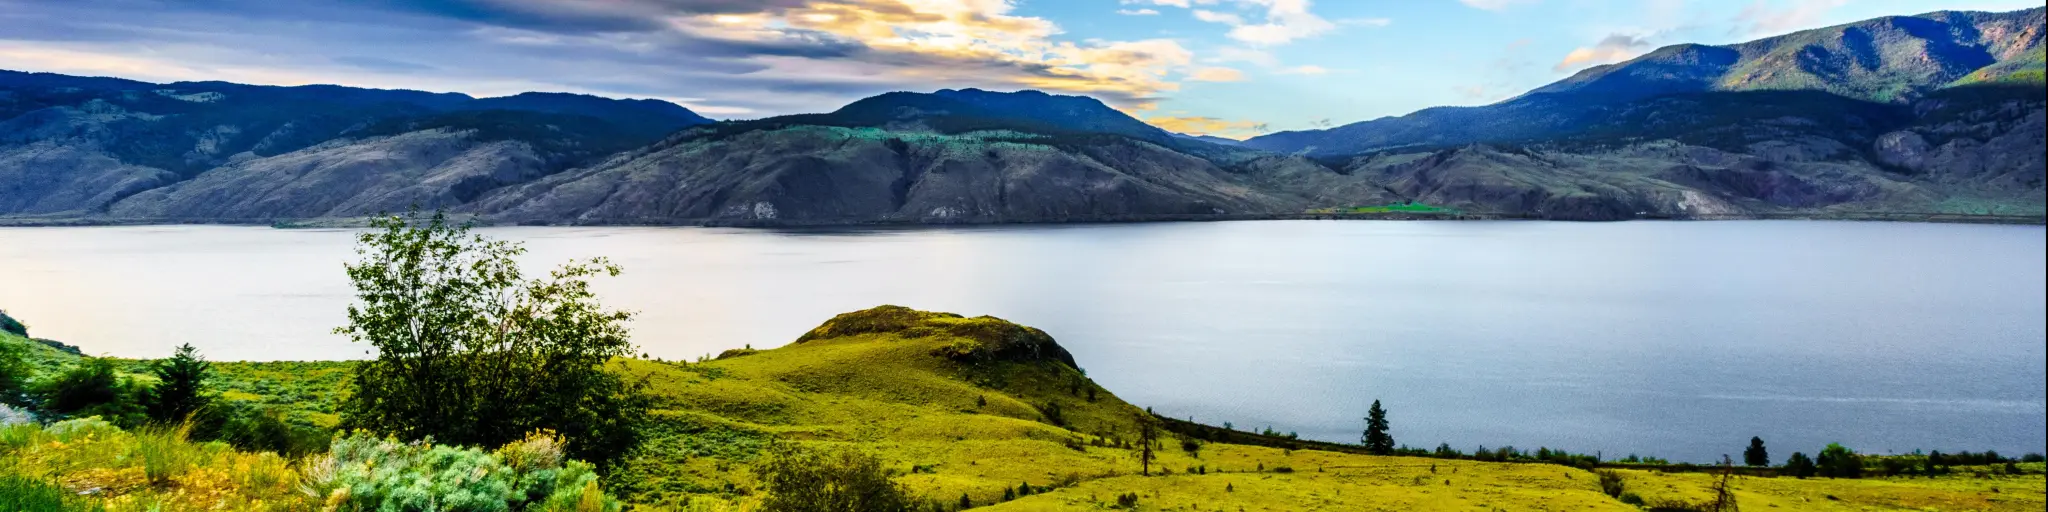 Kamloops Lake, Trans Canada Highway, British Columbia, Canada at sunset with green land in the foreground, a lake and mountains in the distance. 